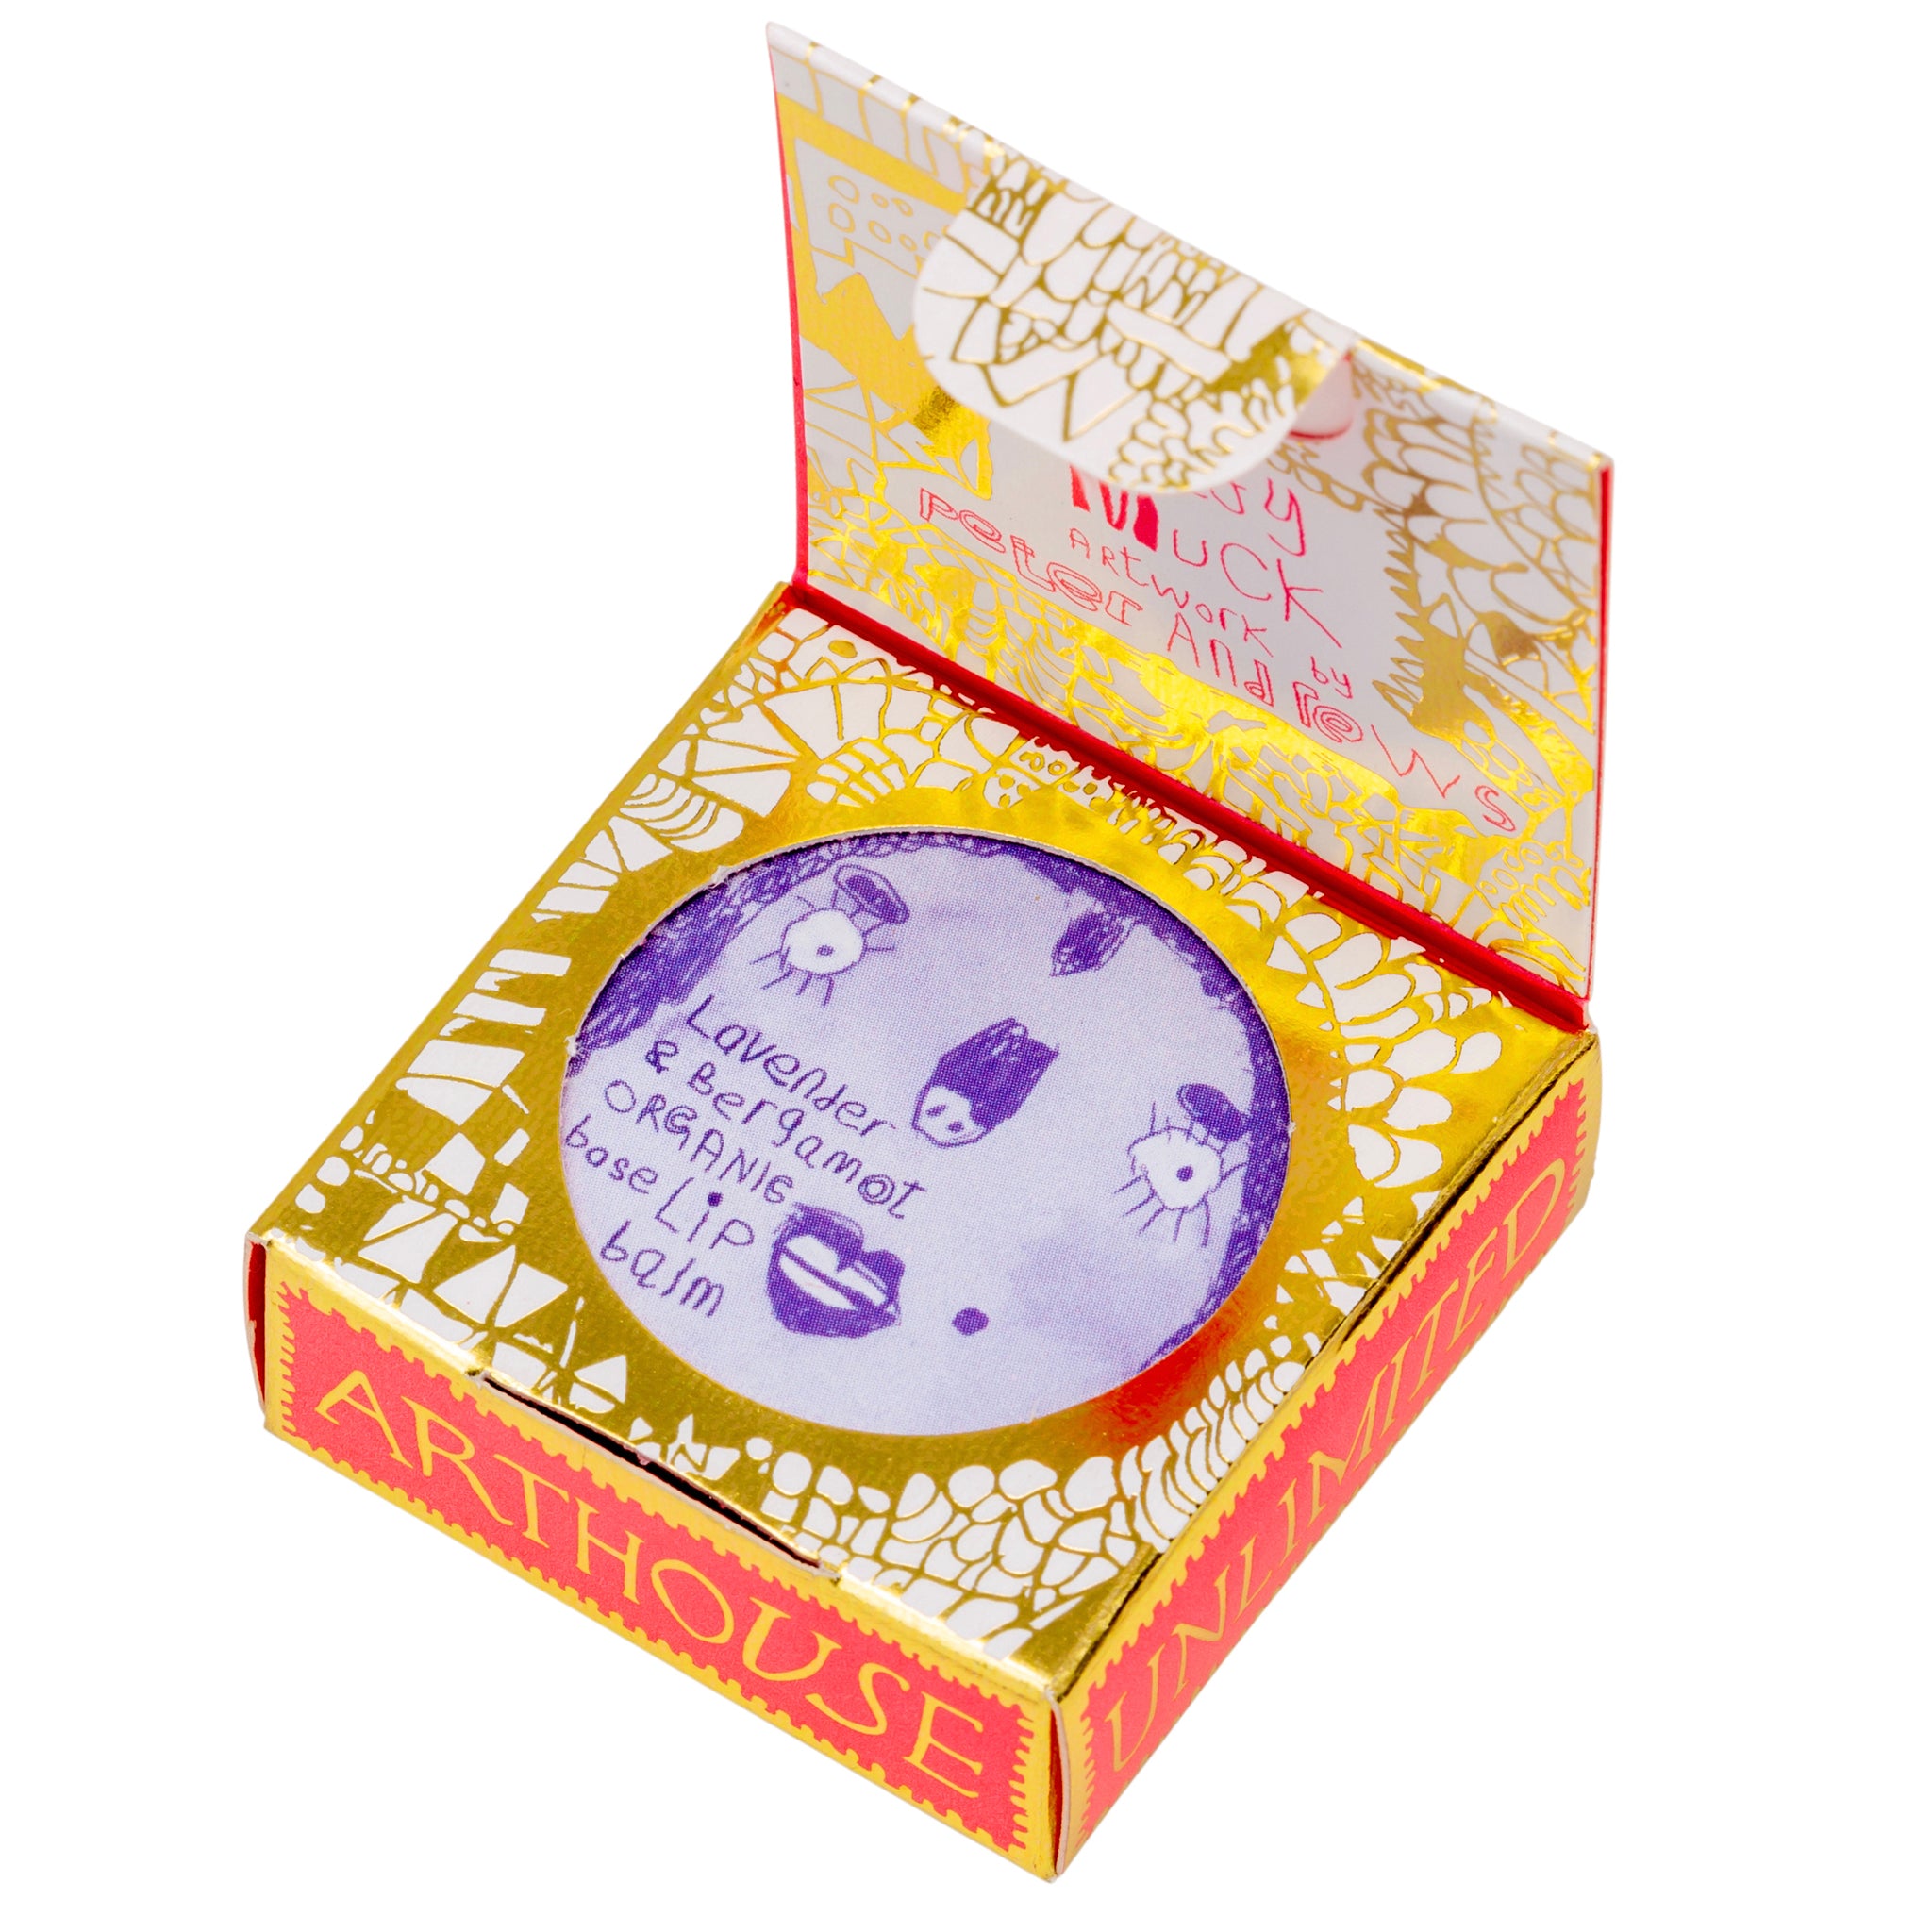 Pink and gold open box containing Lady Muck, Lip Balm, Lavender & Bergamot